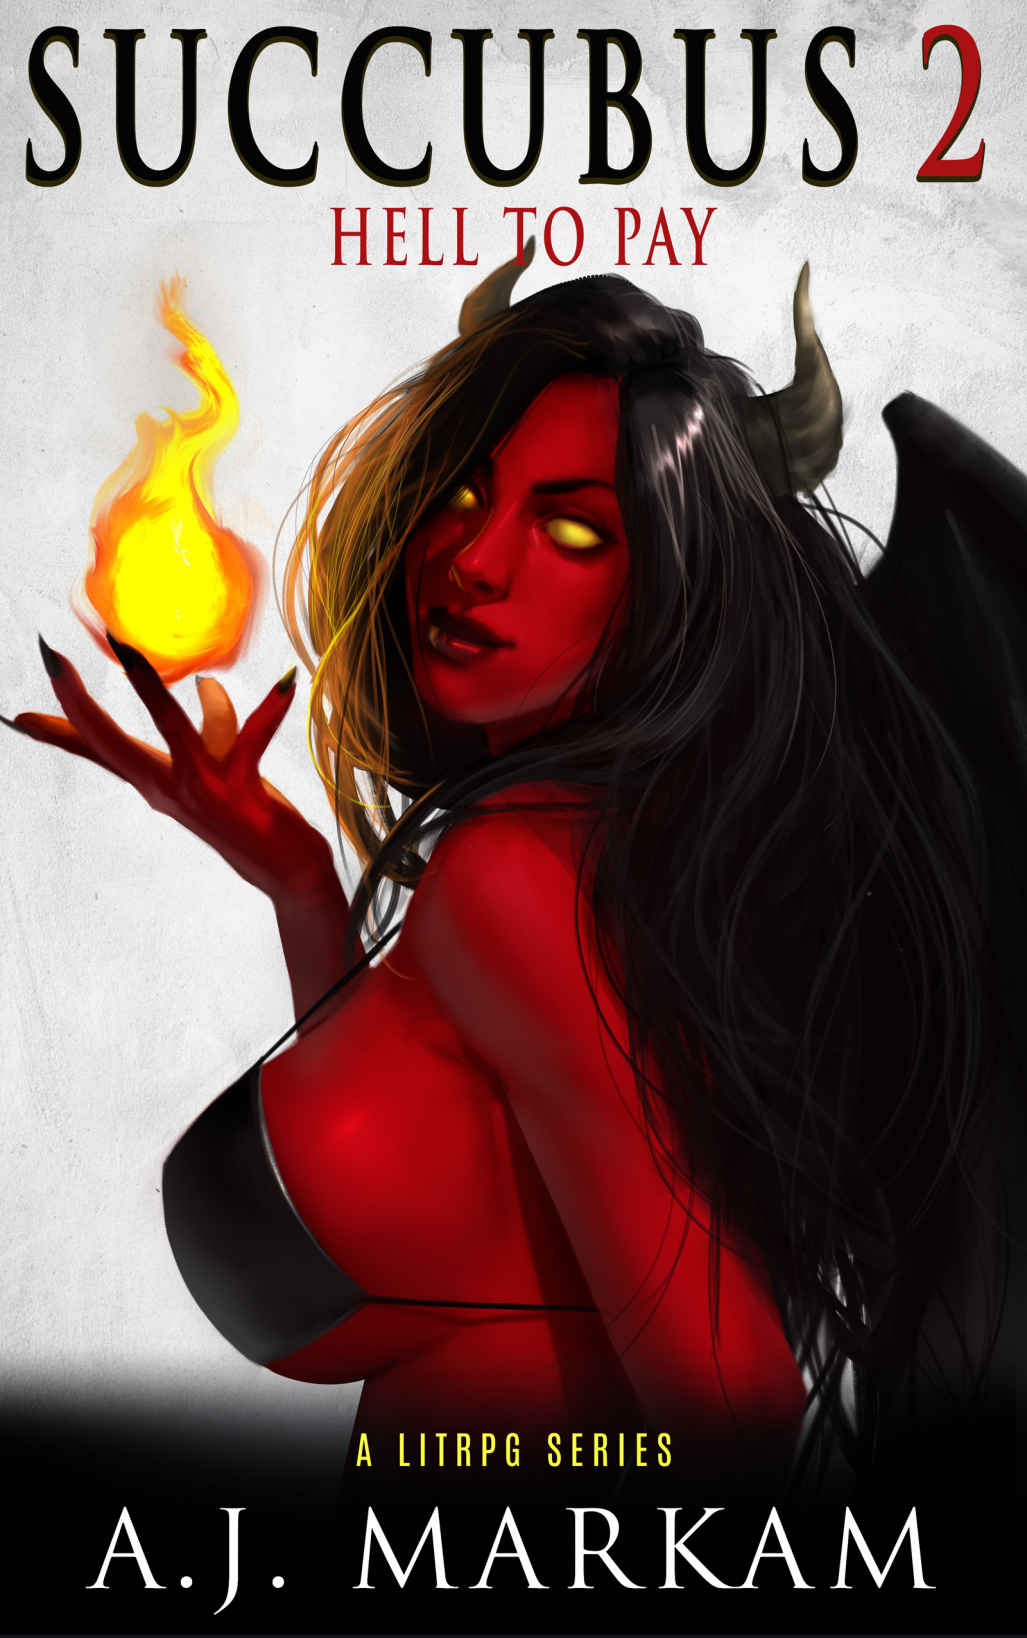 Succubus 2 (Hell To Pay): A LitRPG Series